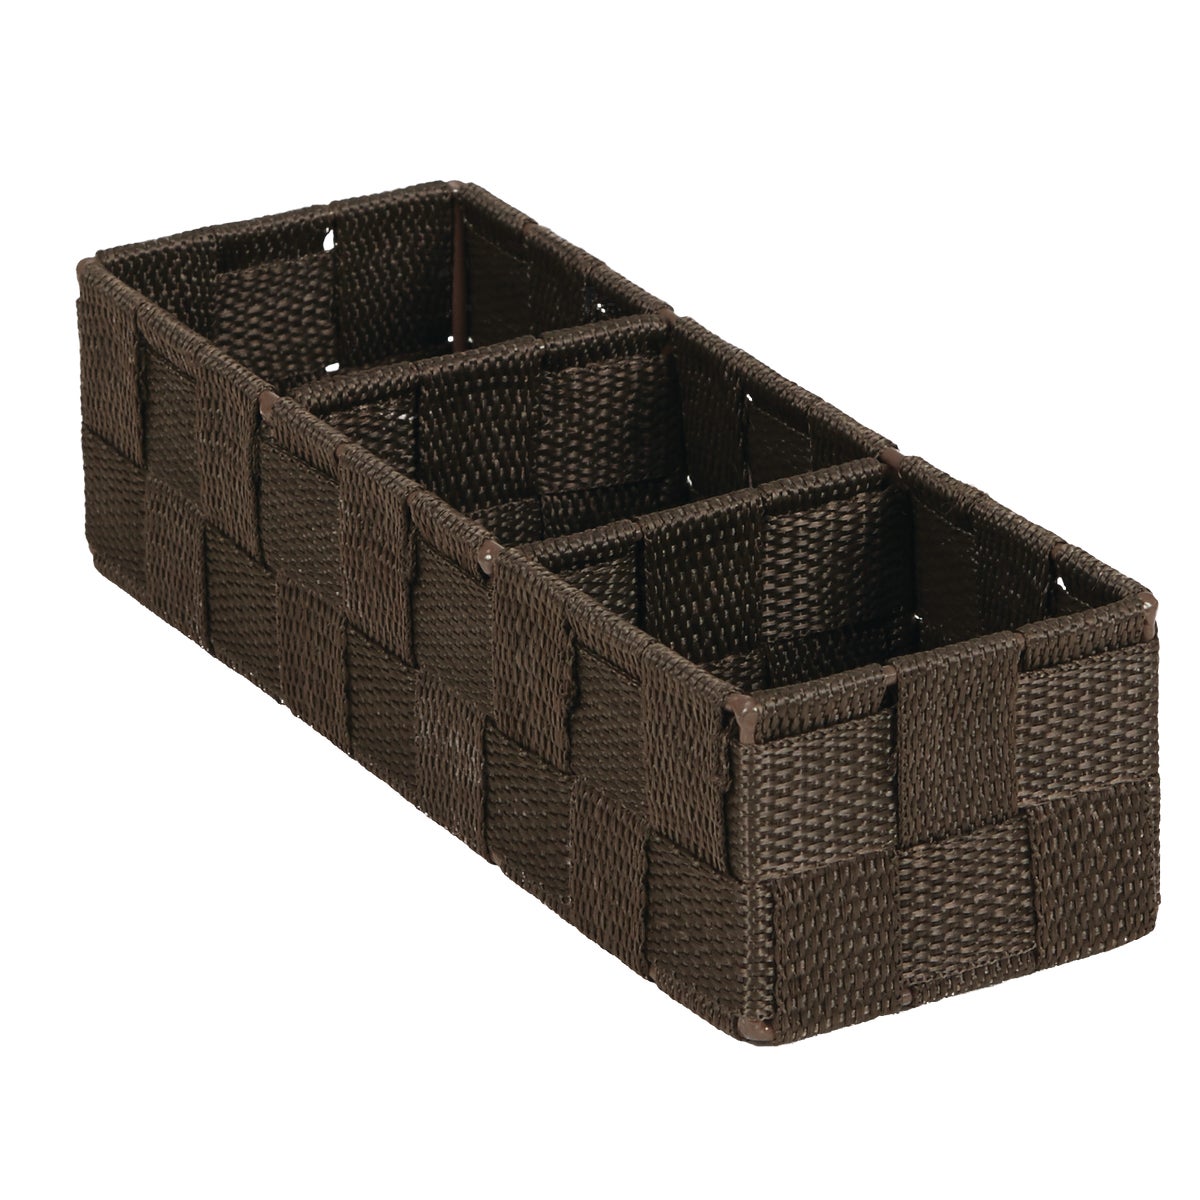 Home Impressions 3.25 In. W. x 2.25 In. H. x 9.5 In. L. Woven Storage Tray, Brown